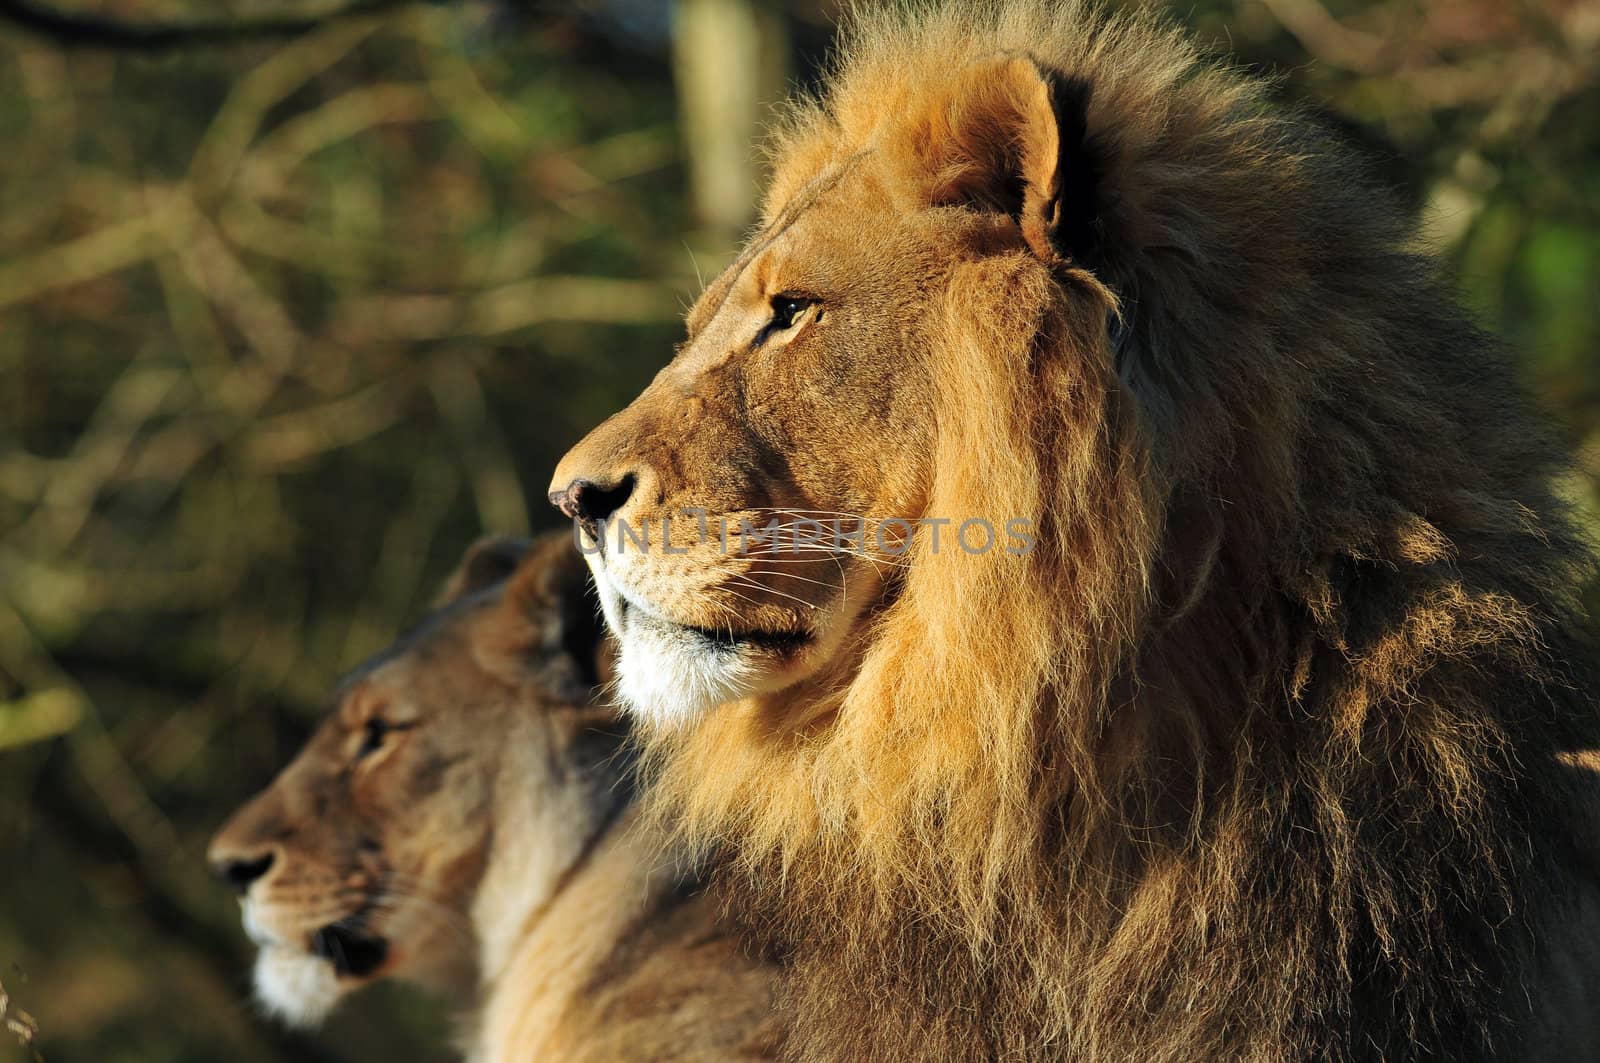 The majestic family portrait - Lion king and his queen in the background